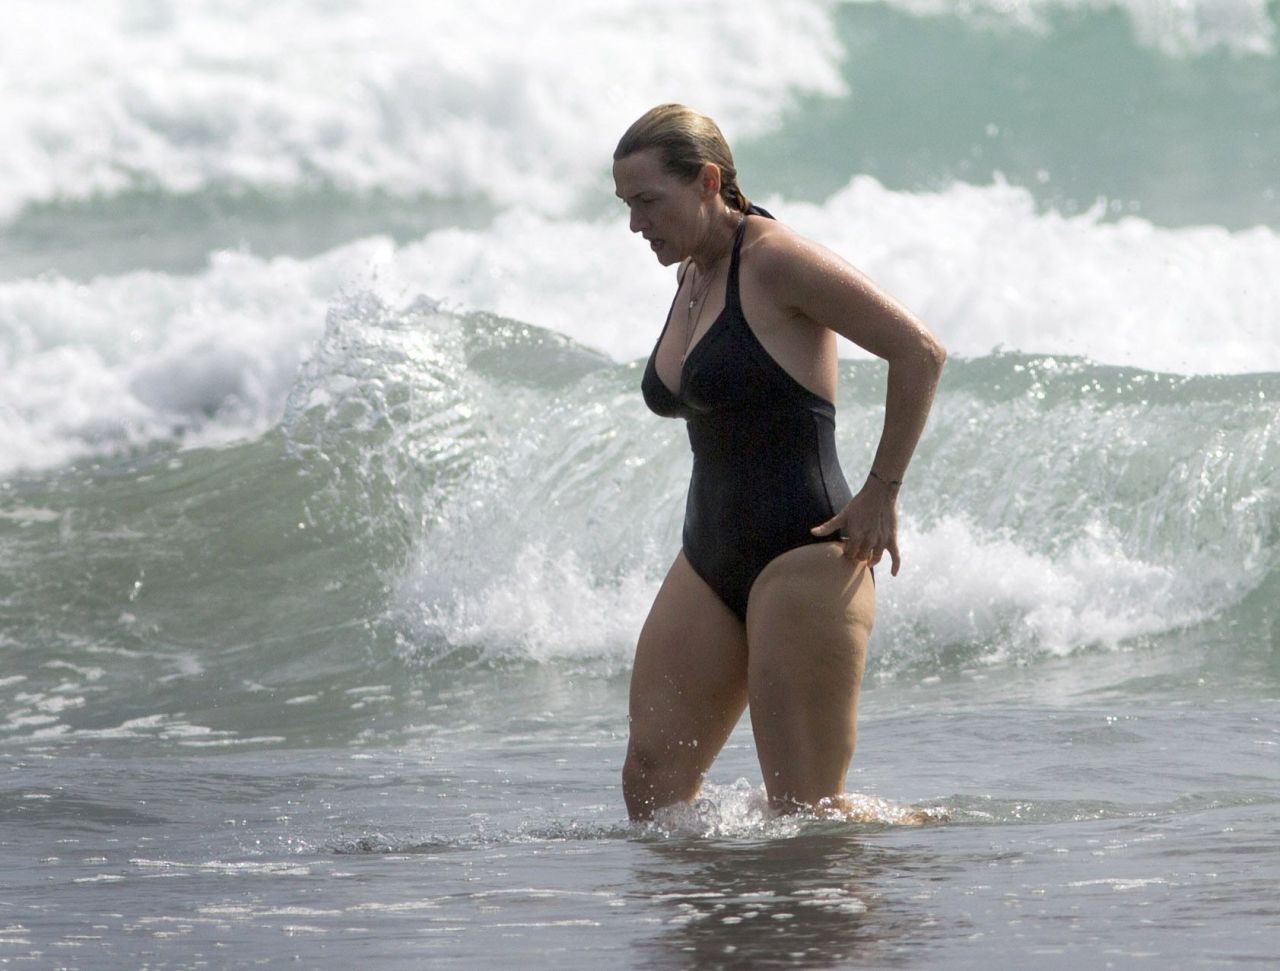 Kate Winslet in a Swimsuit at a Beach in Auckland, December 2014.